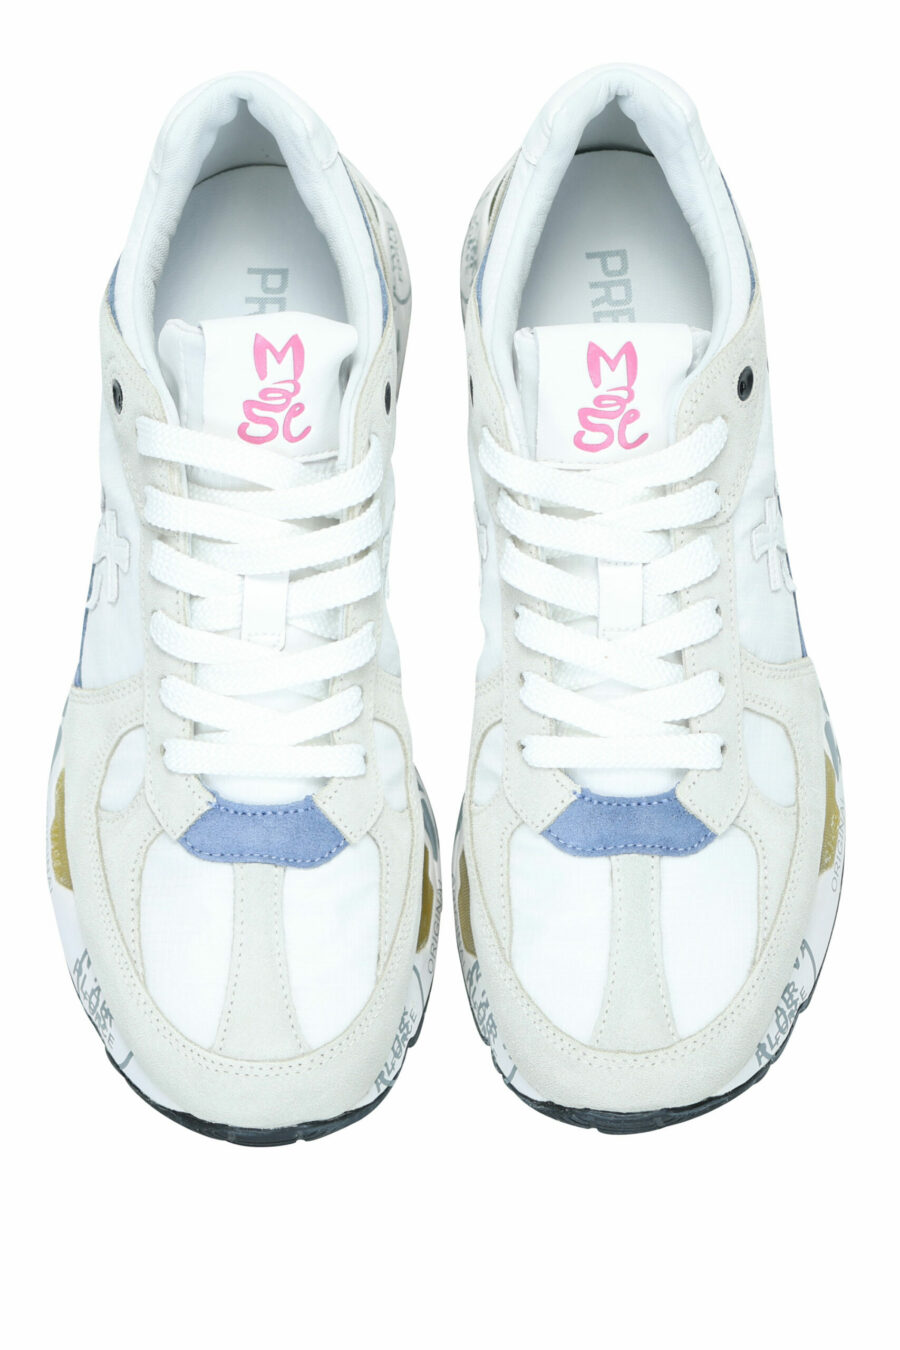 White trainers with blue and green detail "Mase 6625" - 8053680270296 4 scaled